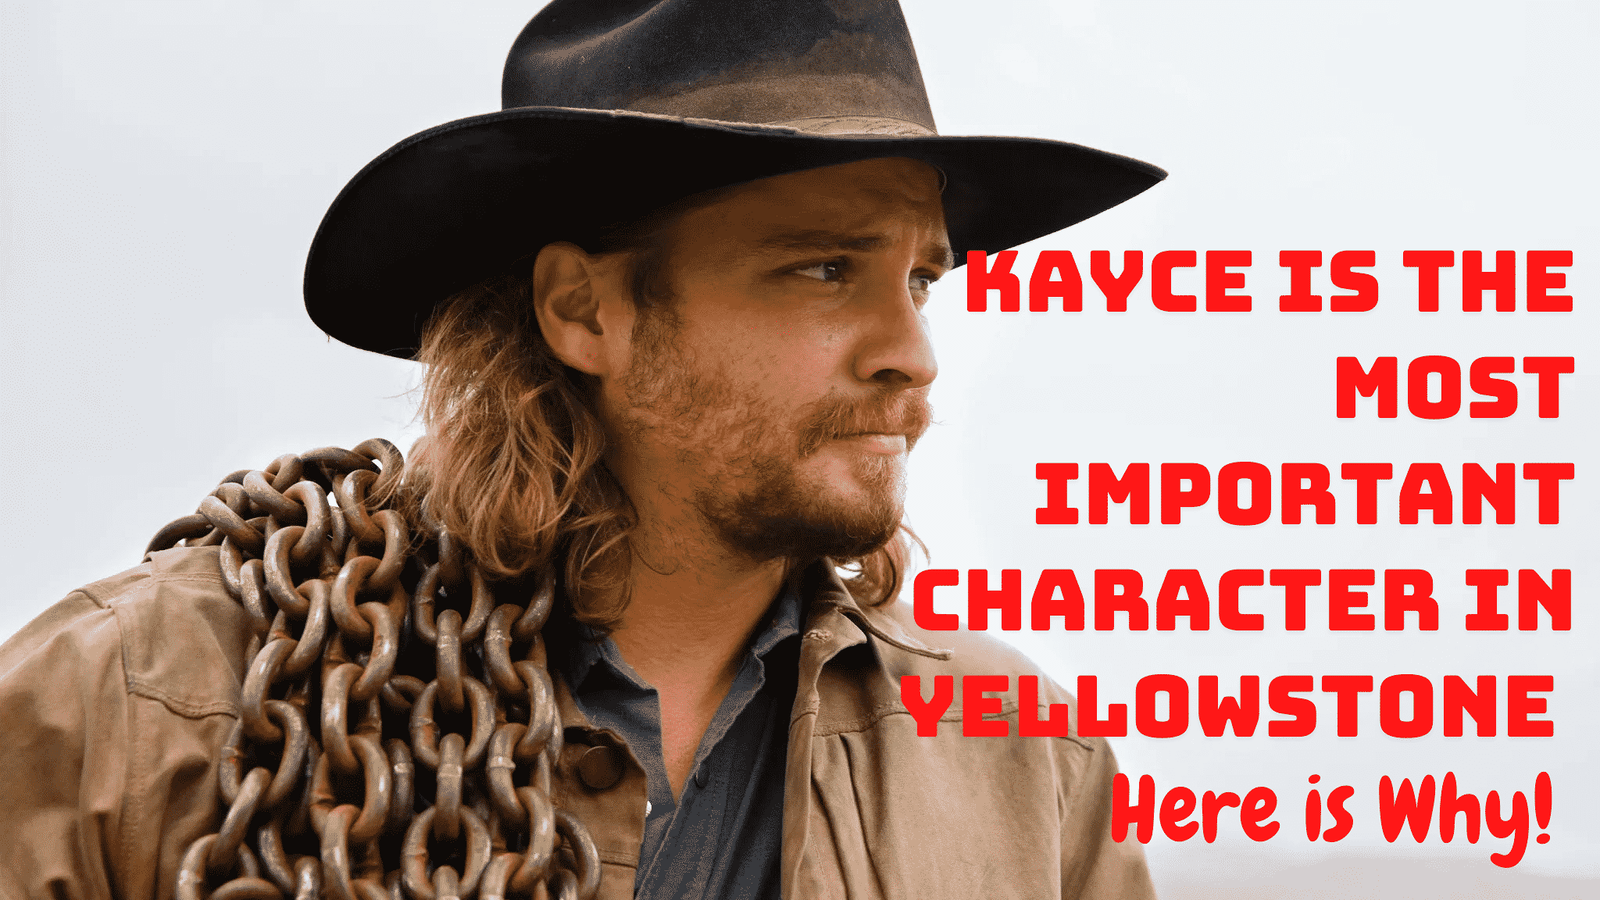 Kayce is the Most Important Character in Yellowstone - Here is Why!